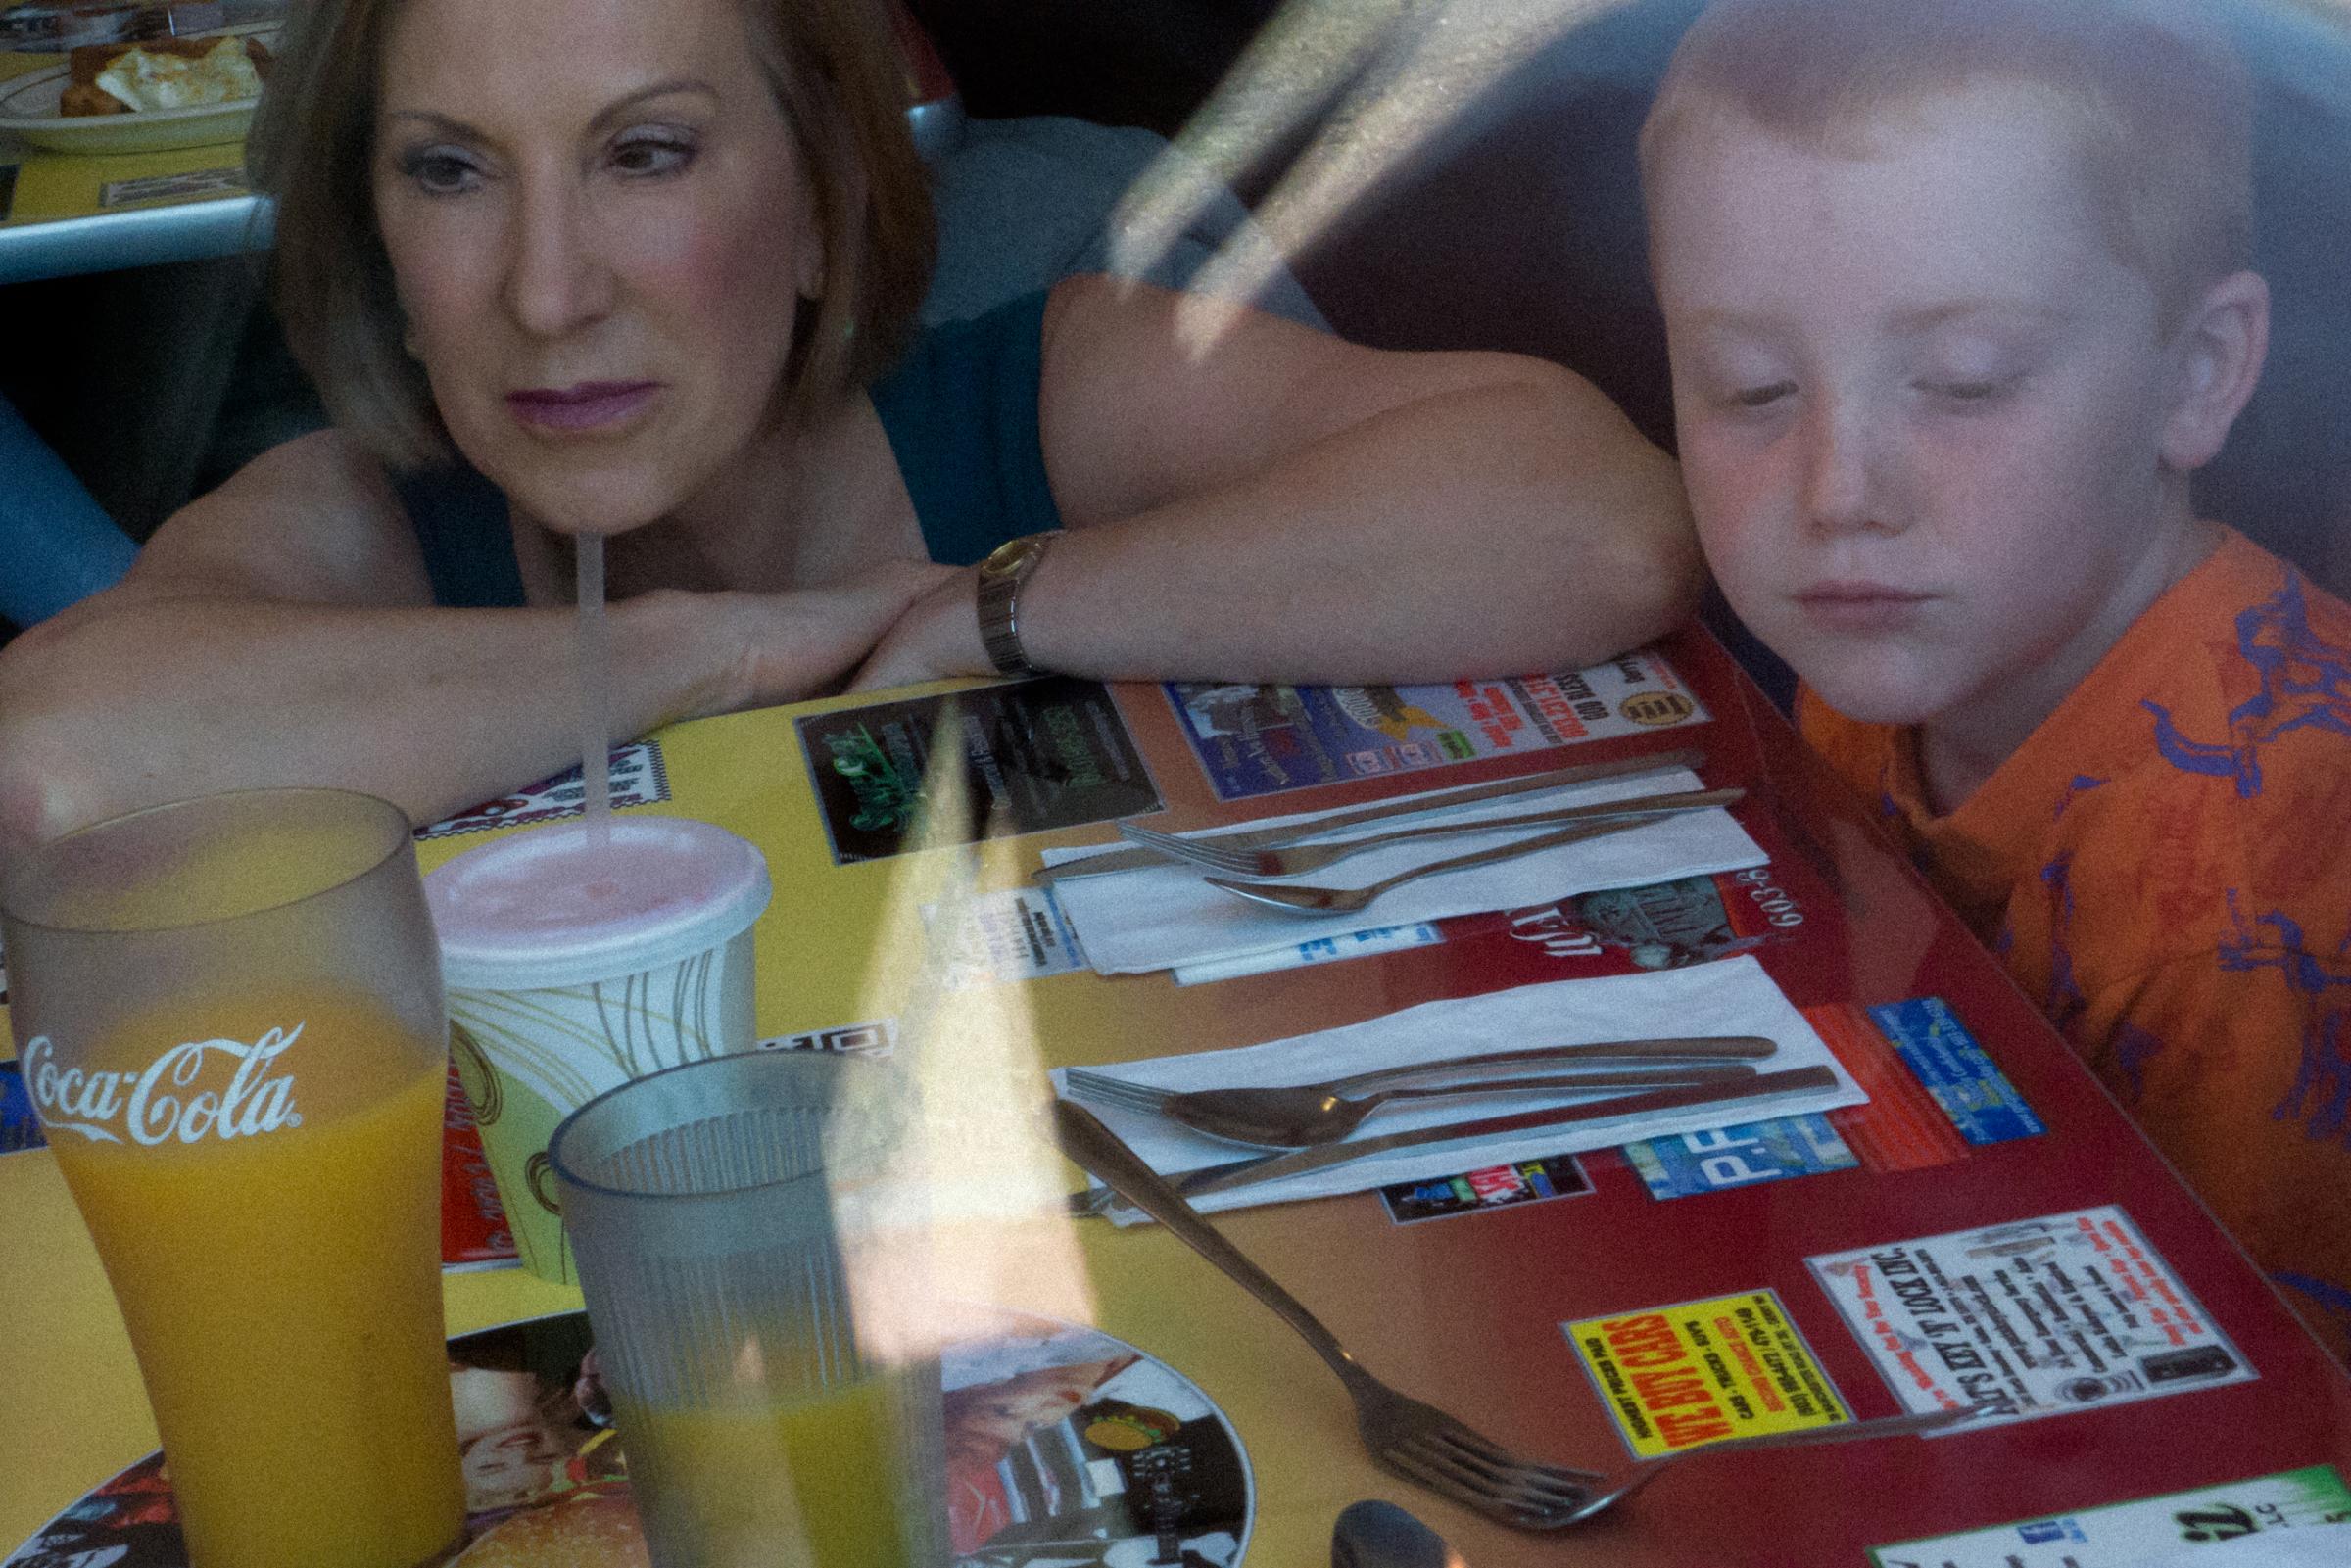 Carly Fiorina campaigning at a diner in Derry, NH, 2015.